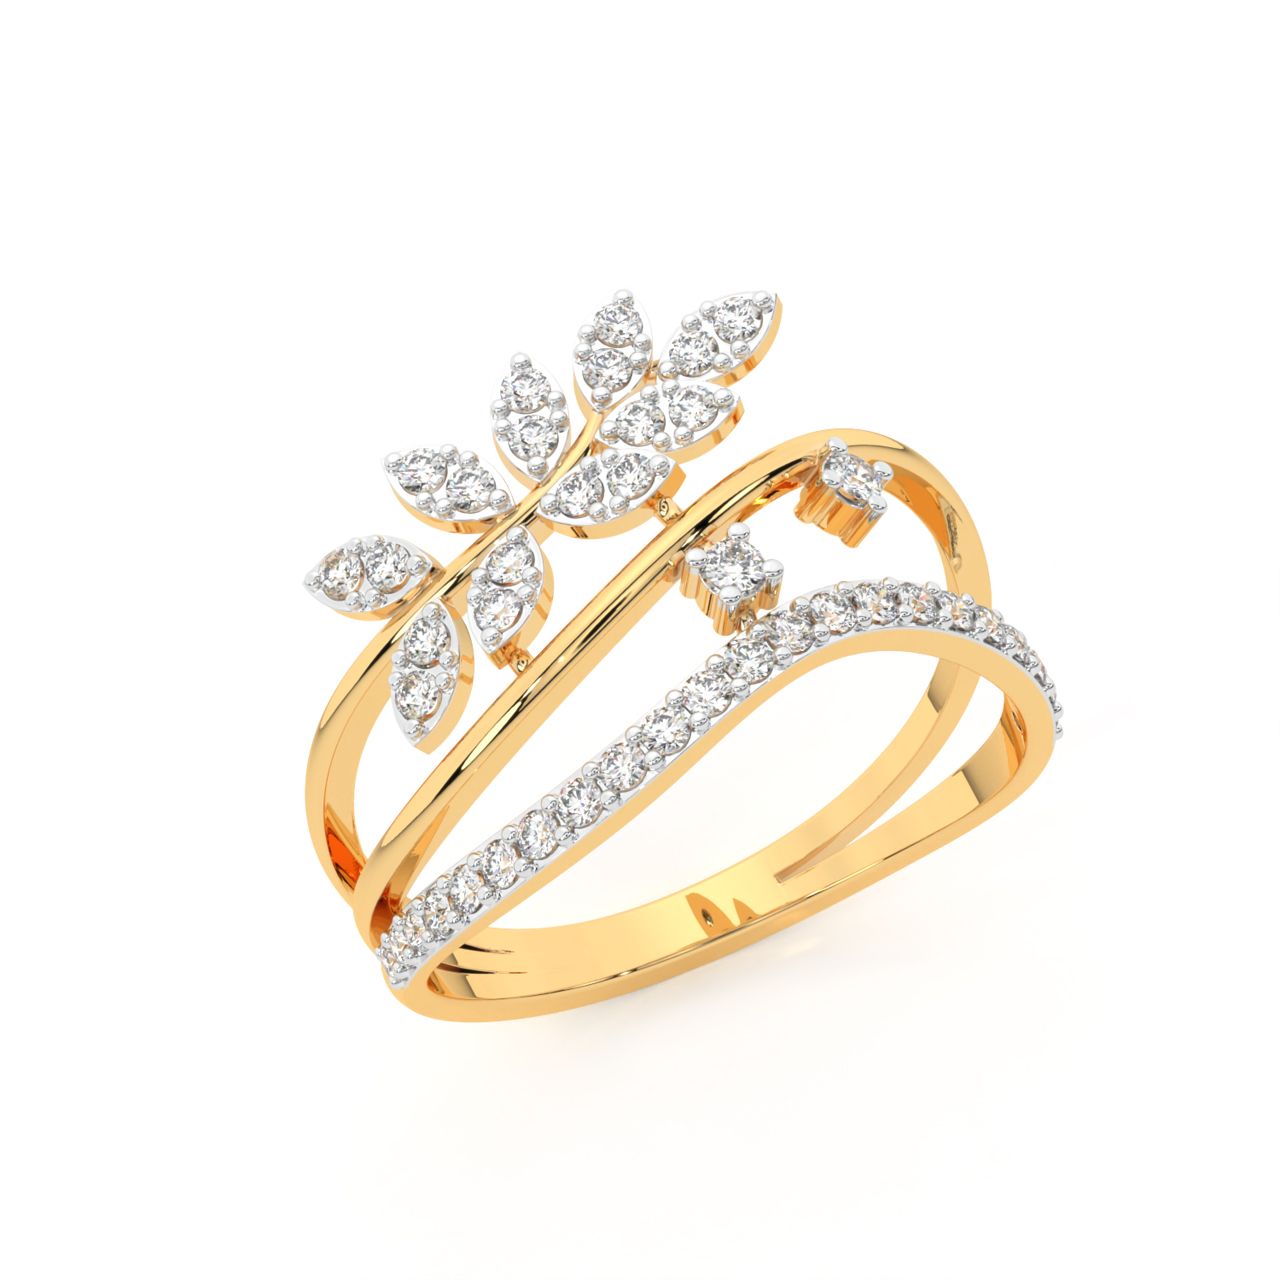 starik jewelry - Rings - Modern golden ring with pure design and curved  lines